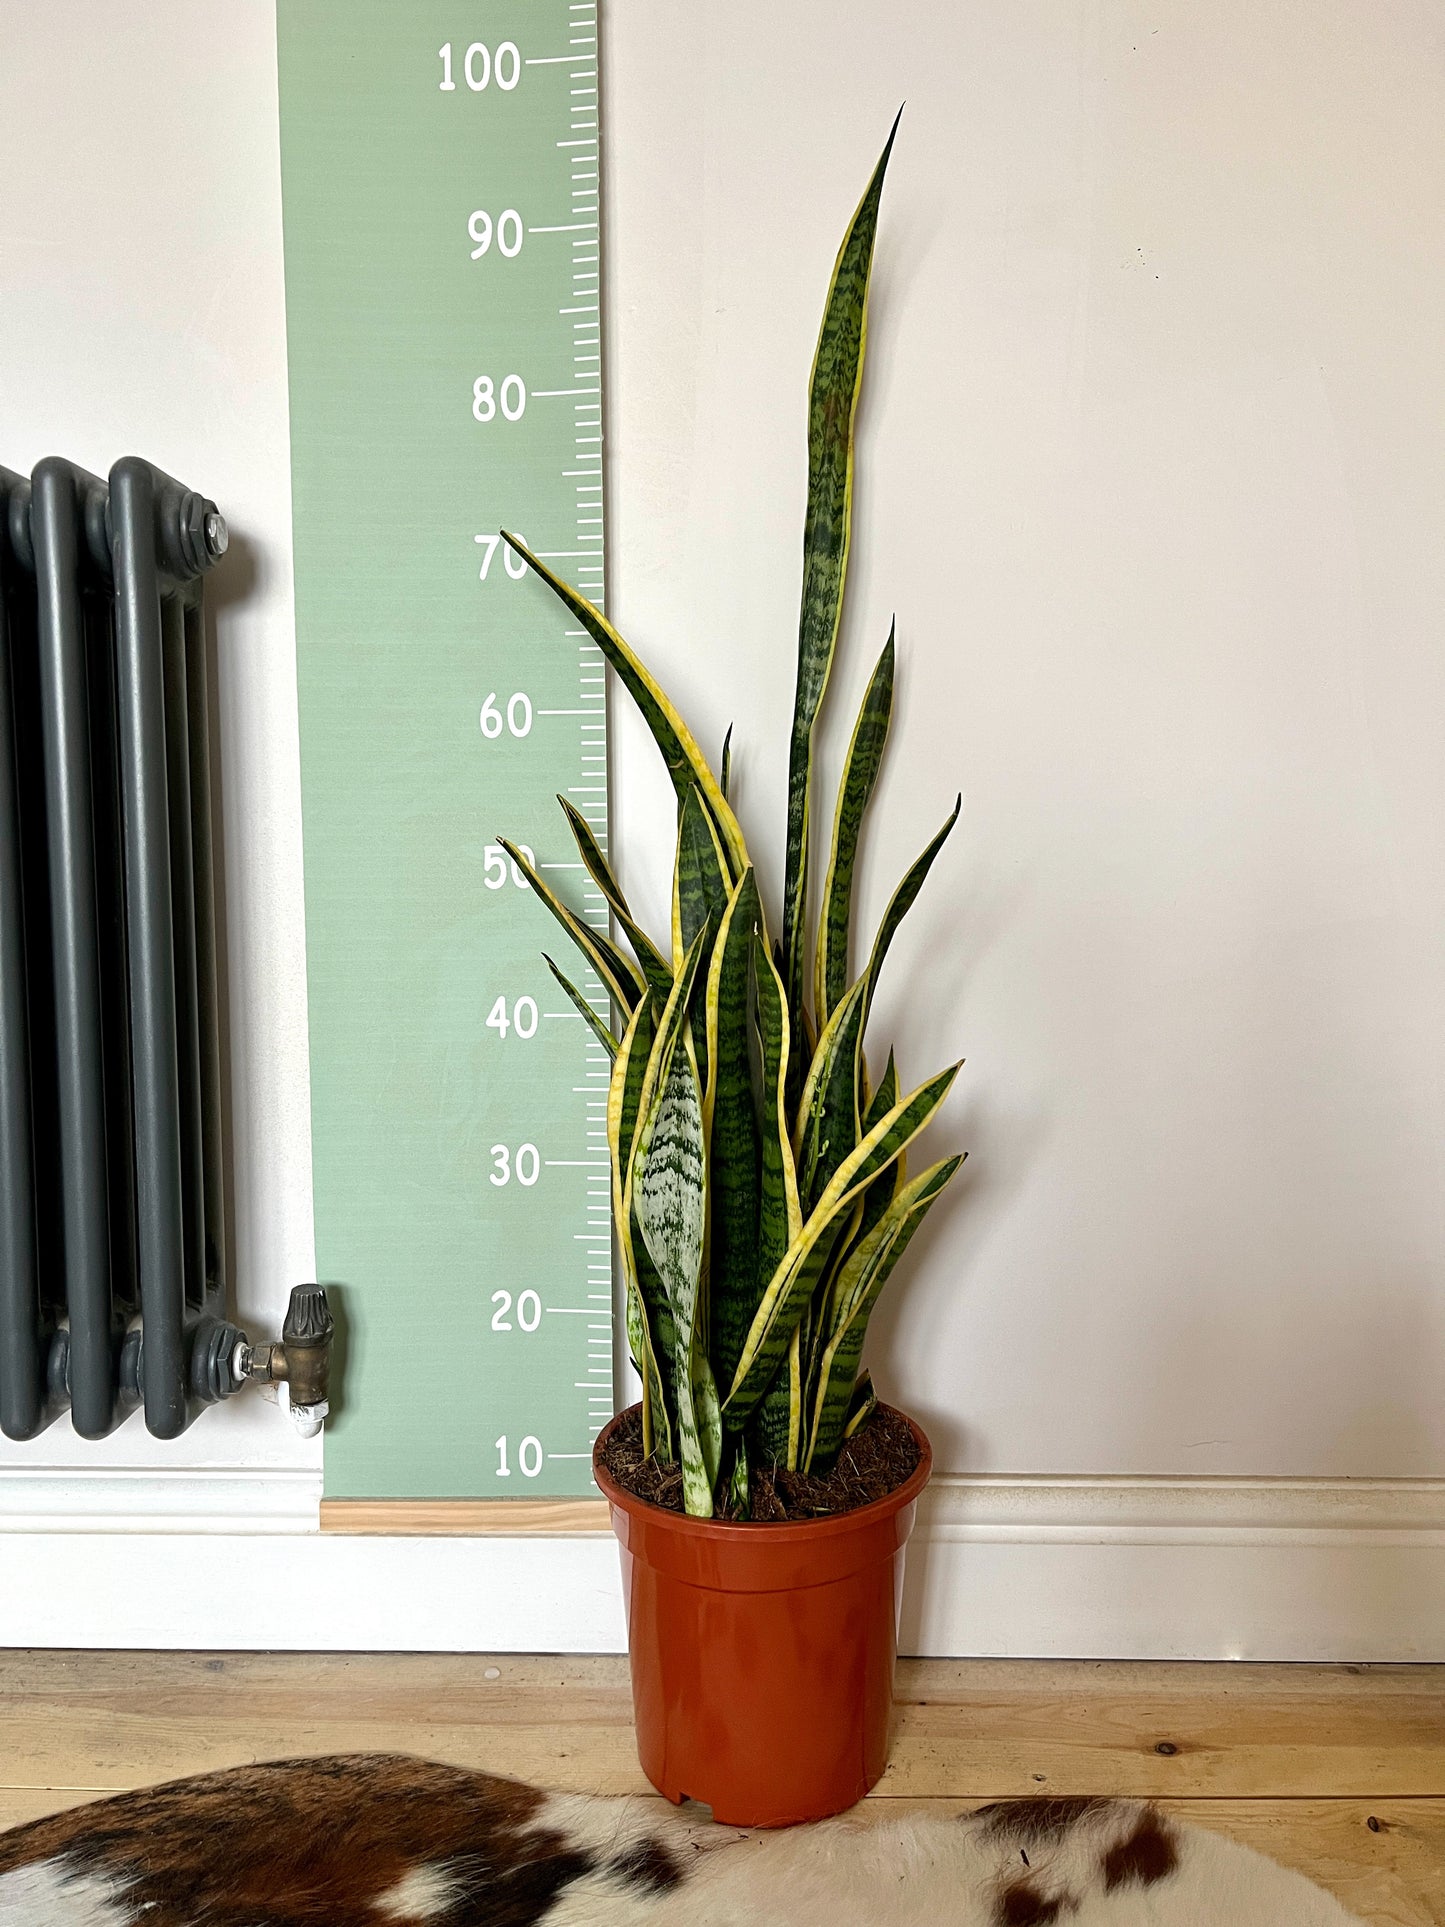 90cm Sansevieria (Snake Plant / Mother in Law’s Tongue)